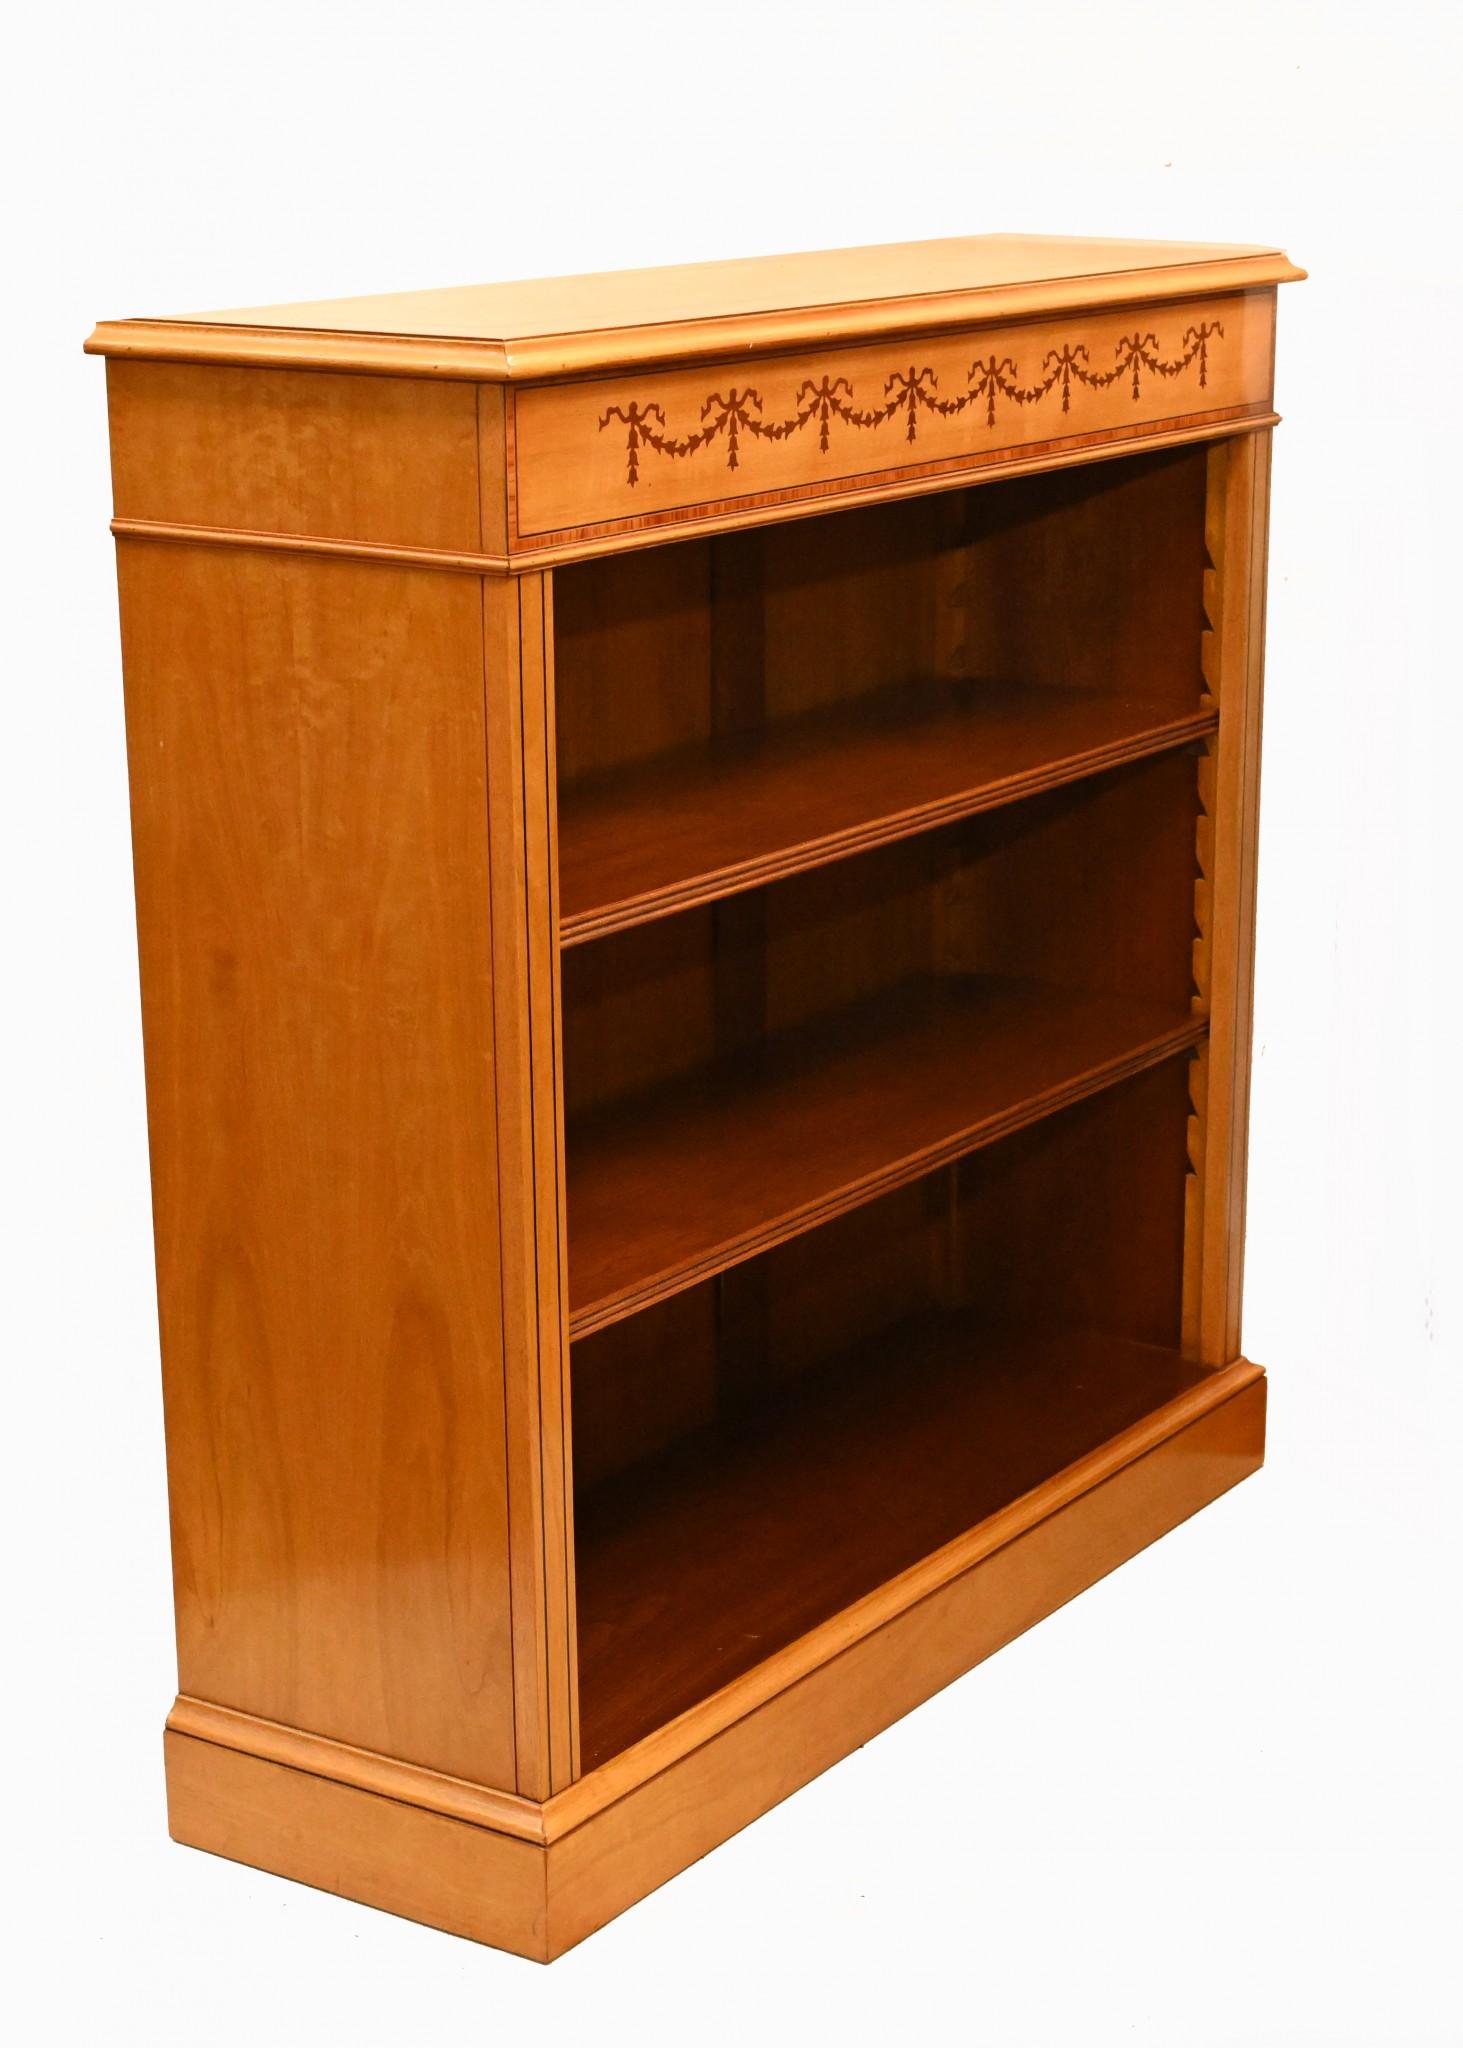 Satinwood Open Bookcase, Regency Bookcases Sheraton Inlay For Sale 7